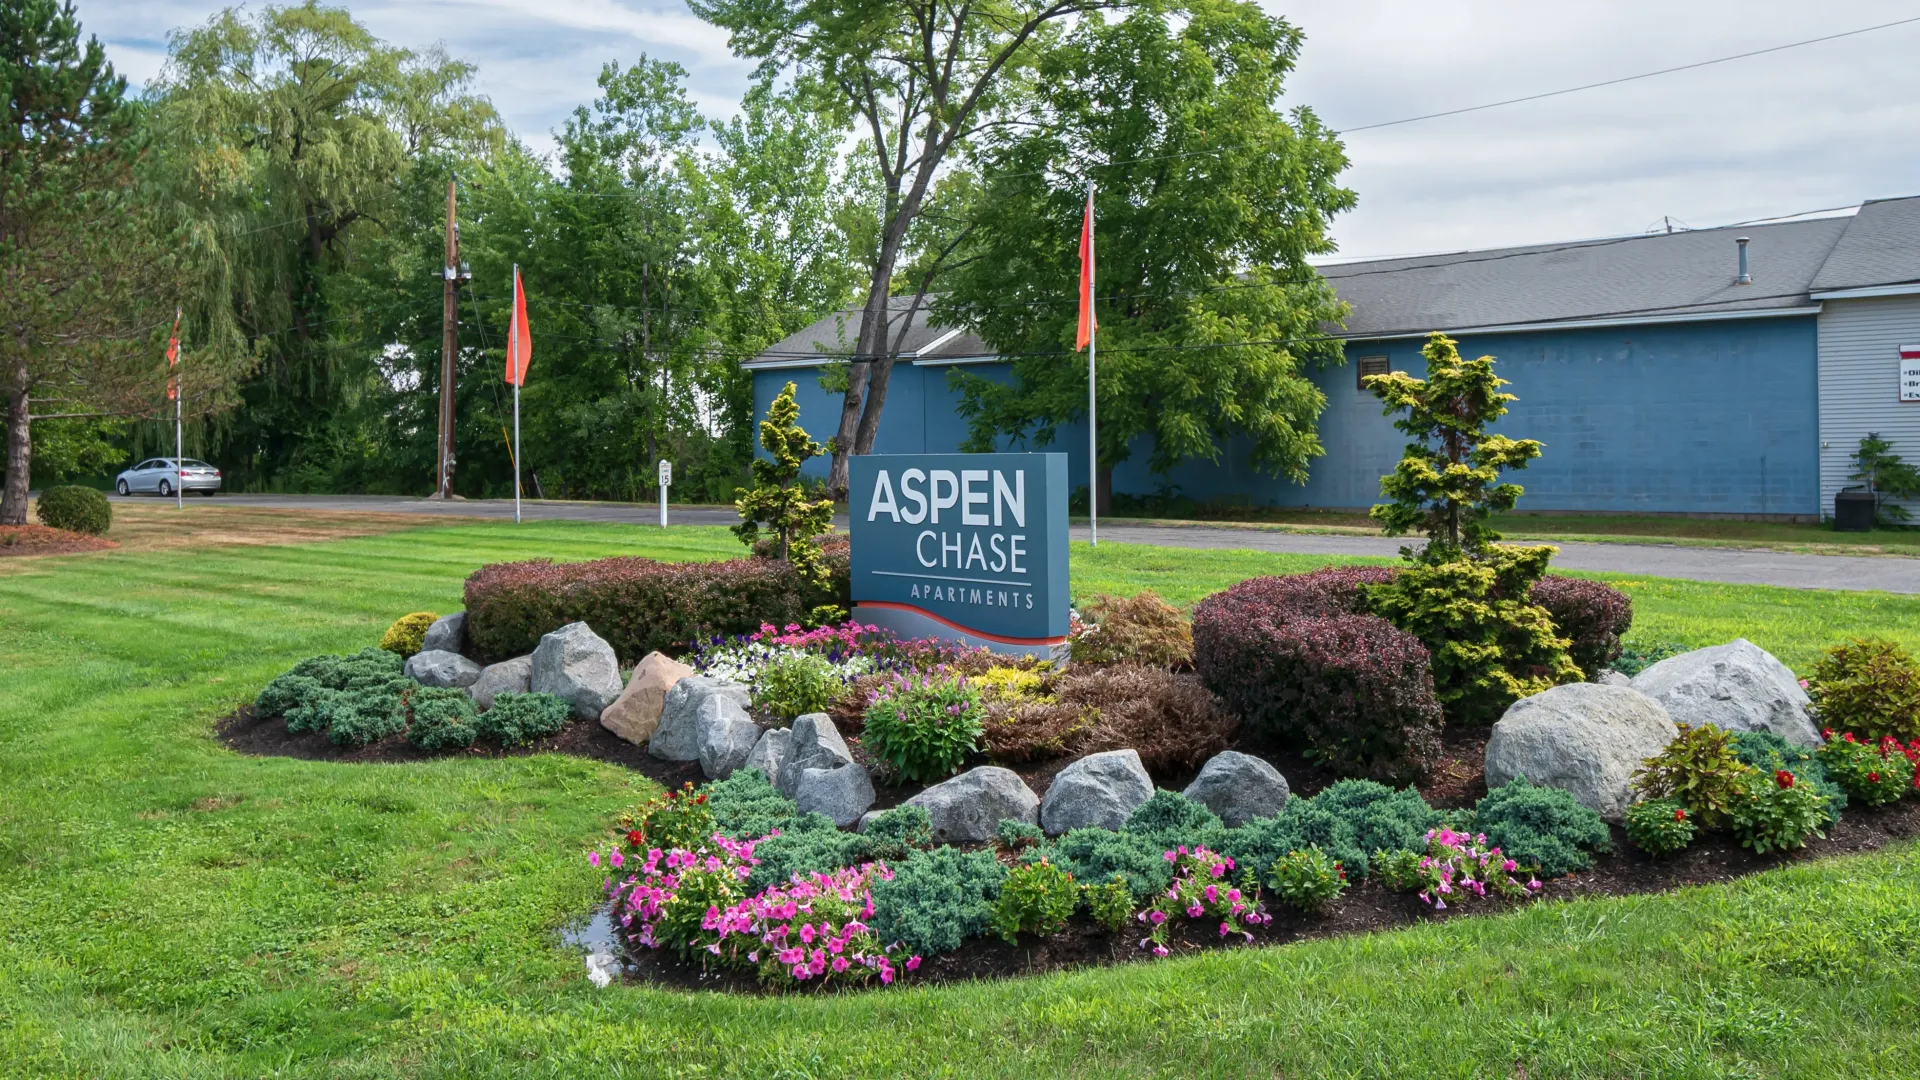 Monument signage for Aspen Chase Apartments with lush landscaping surrounding creating a welcoming atmosphere. 